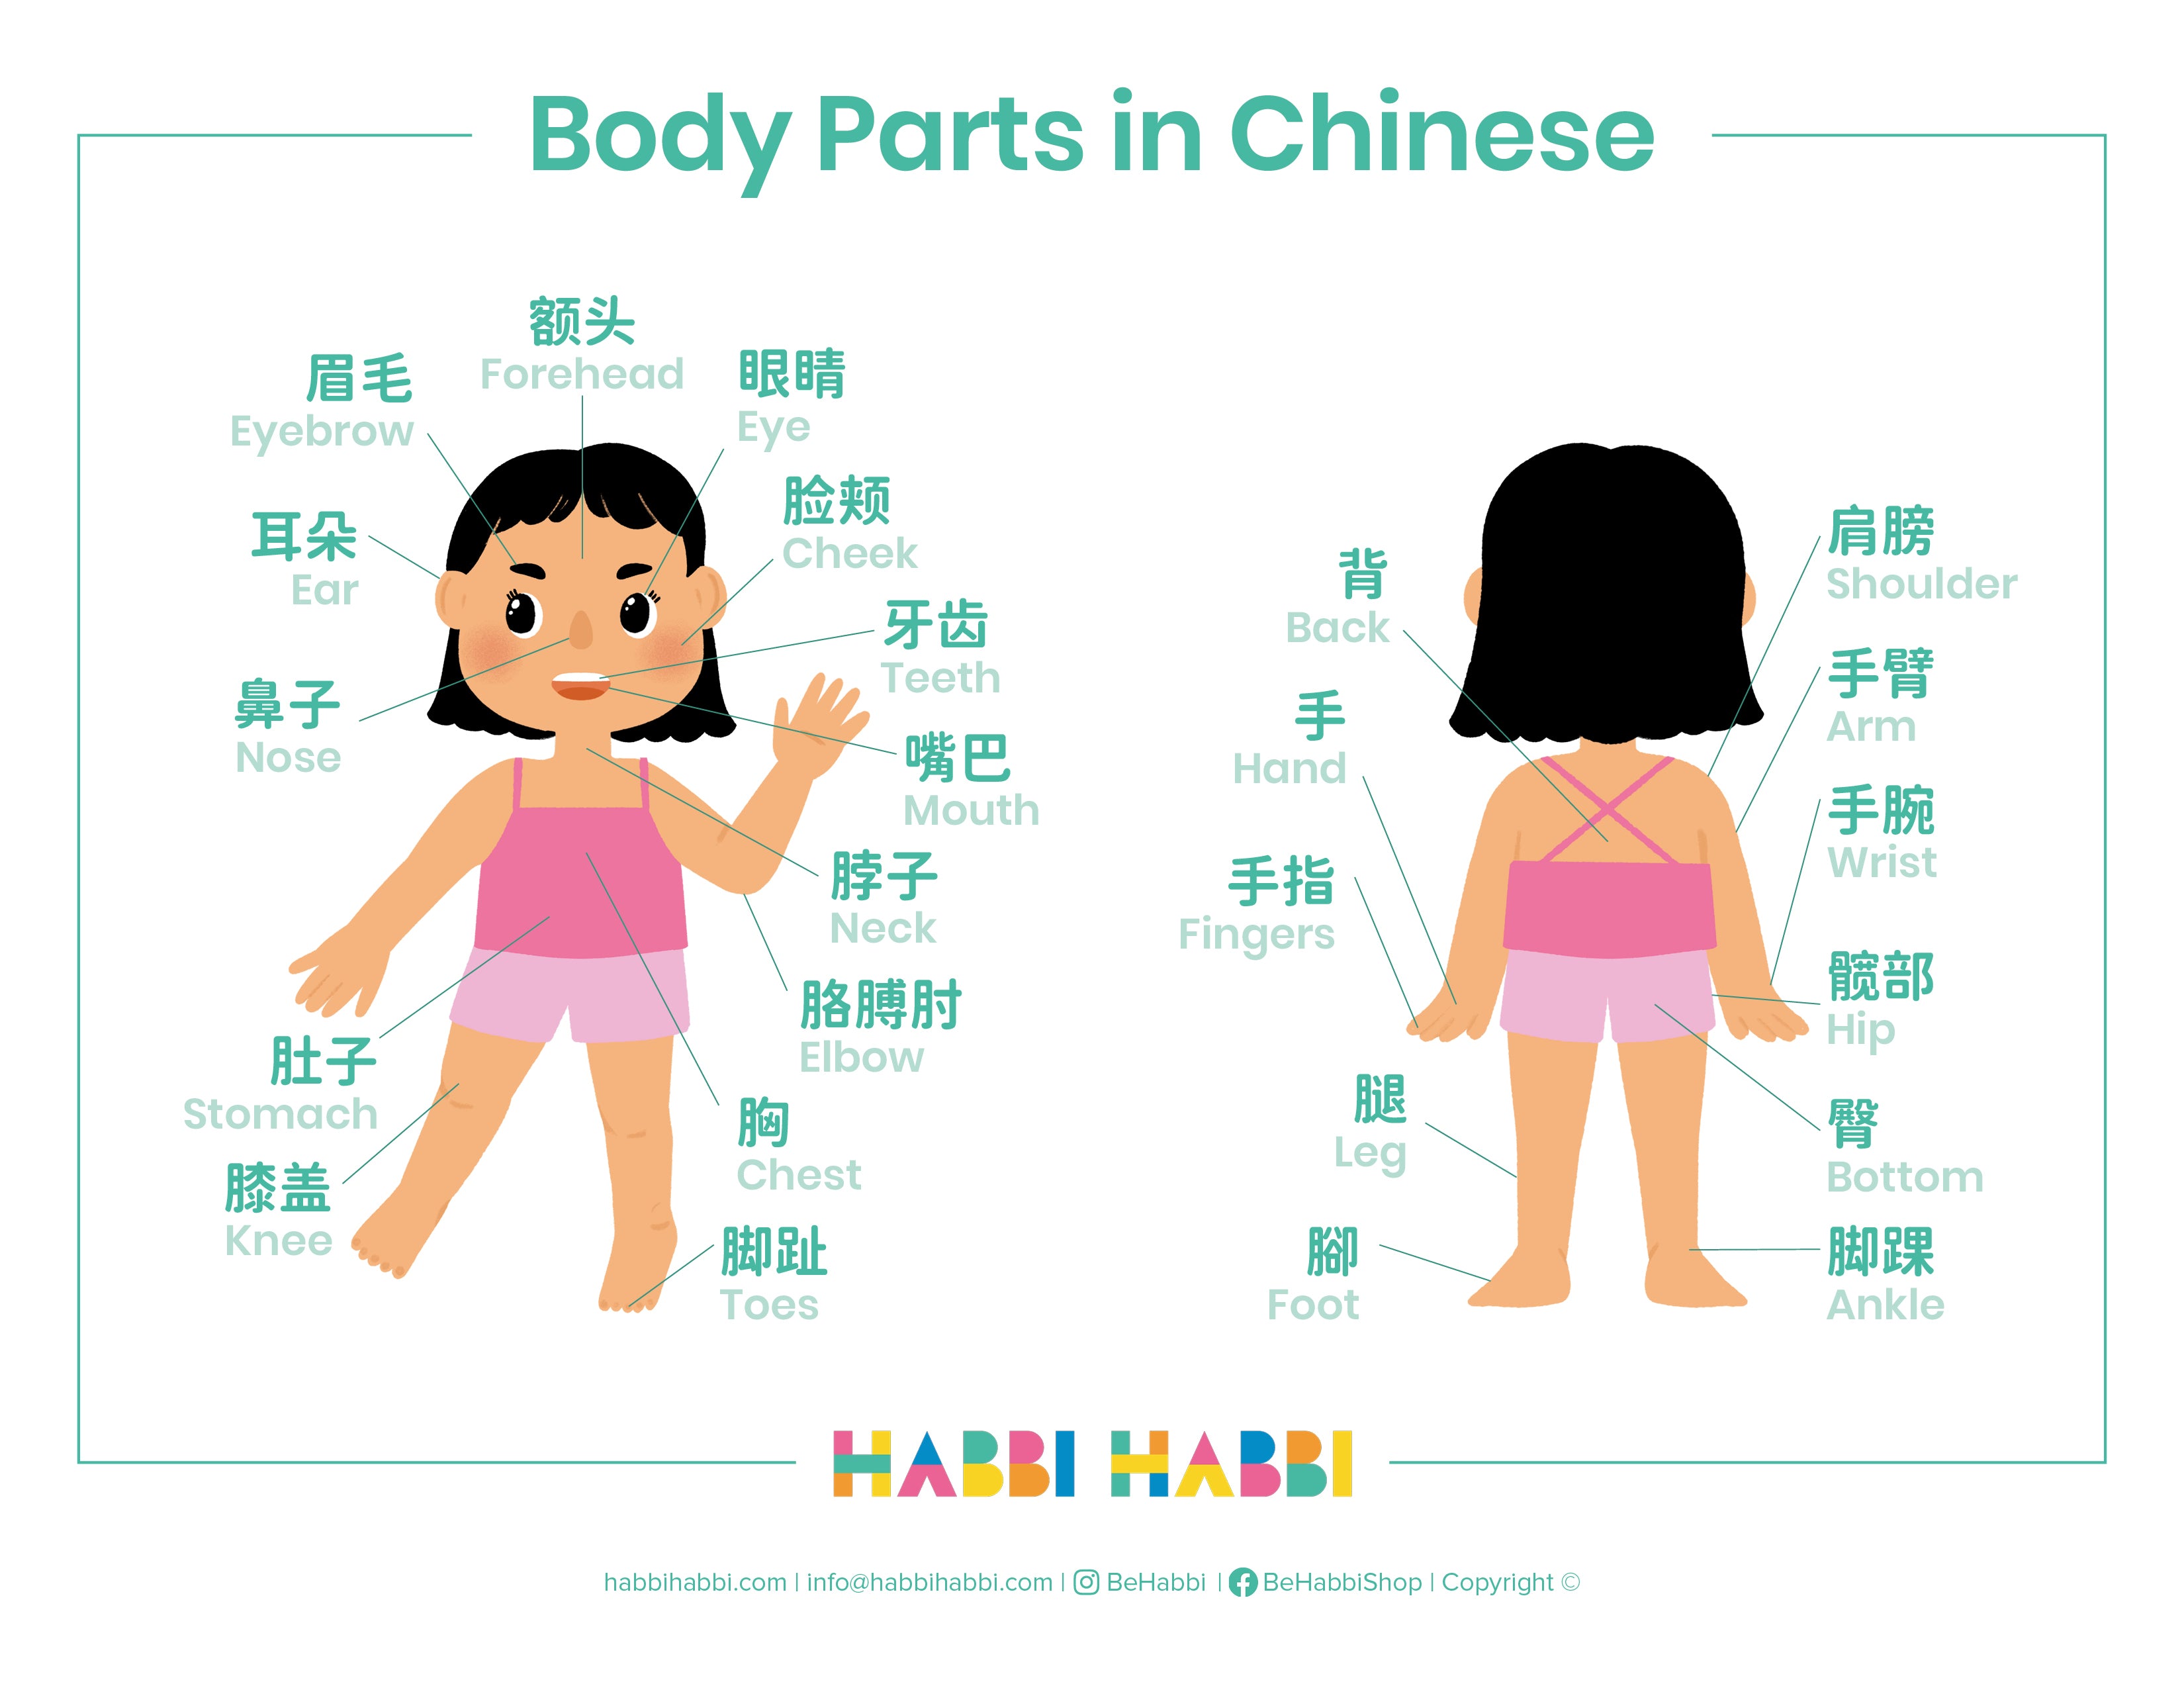 Body Parts in Chinese